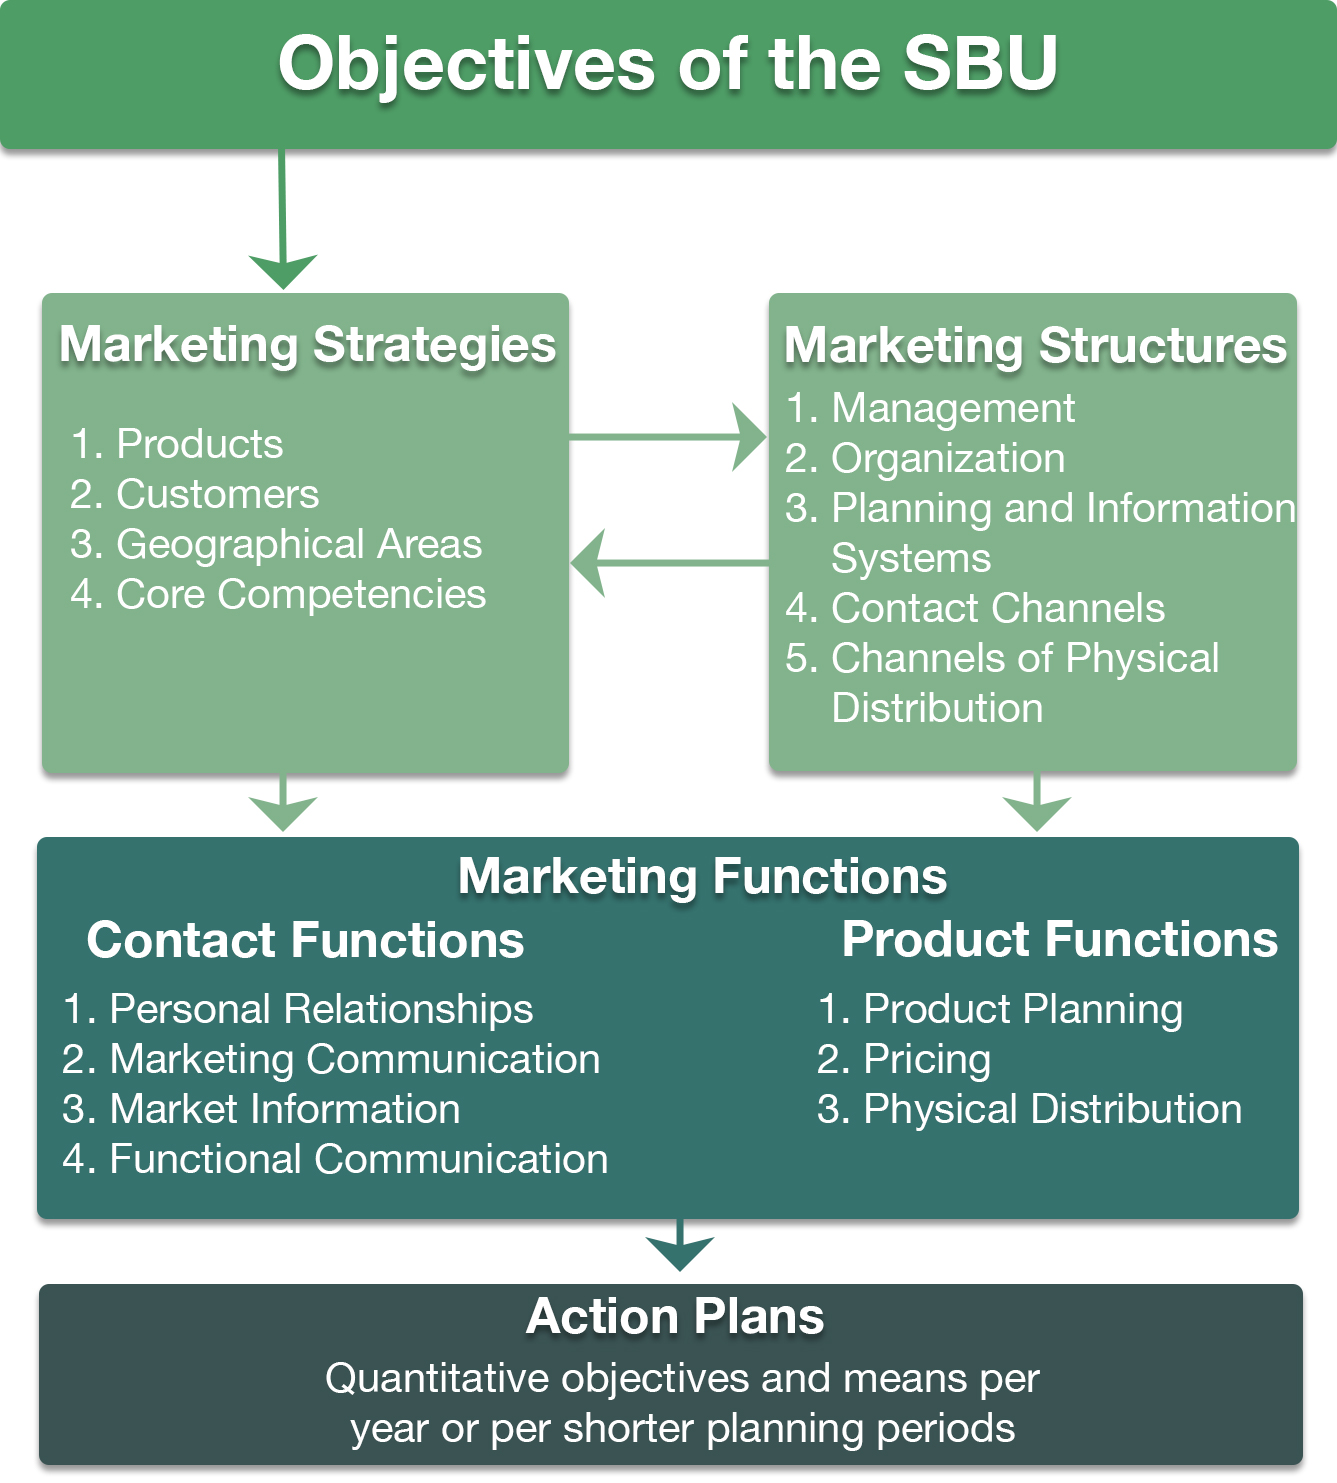 Integrated Model of Marketing and Planning